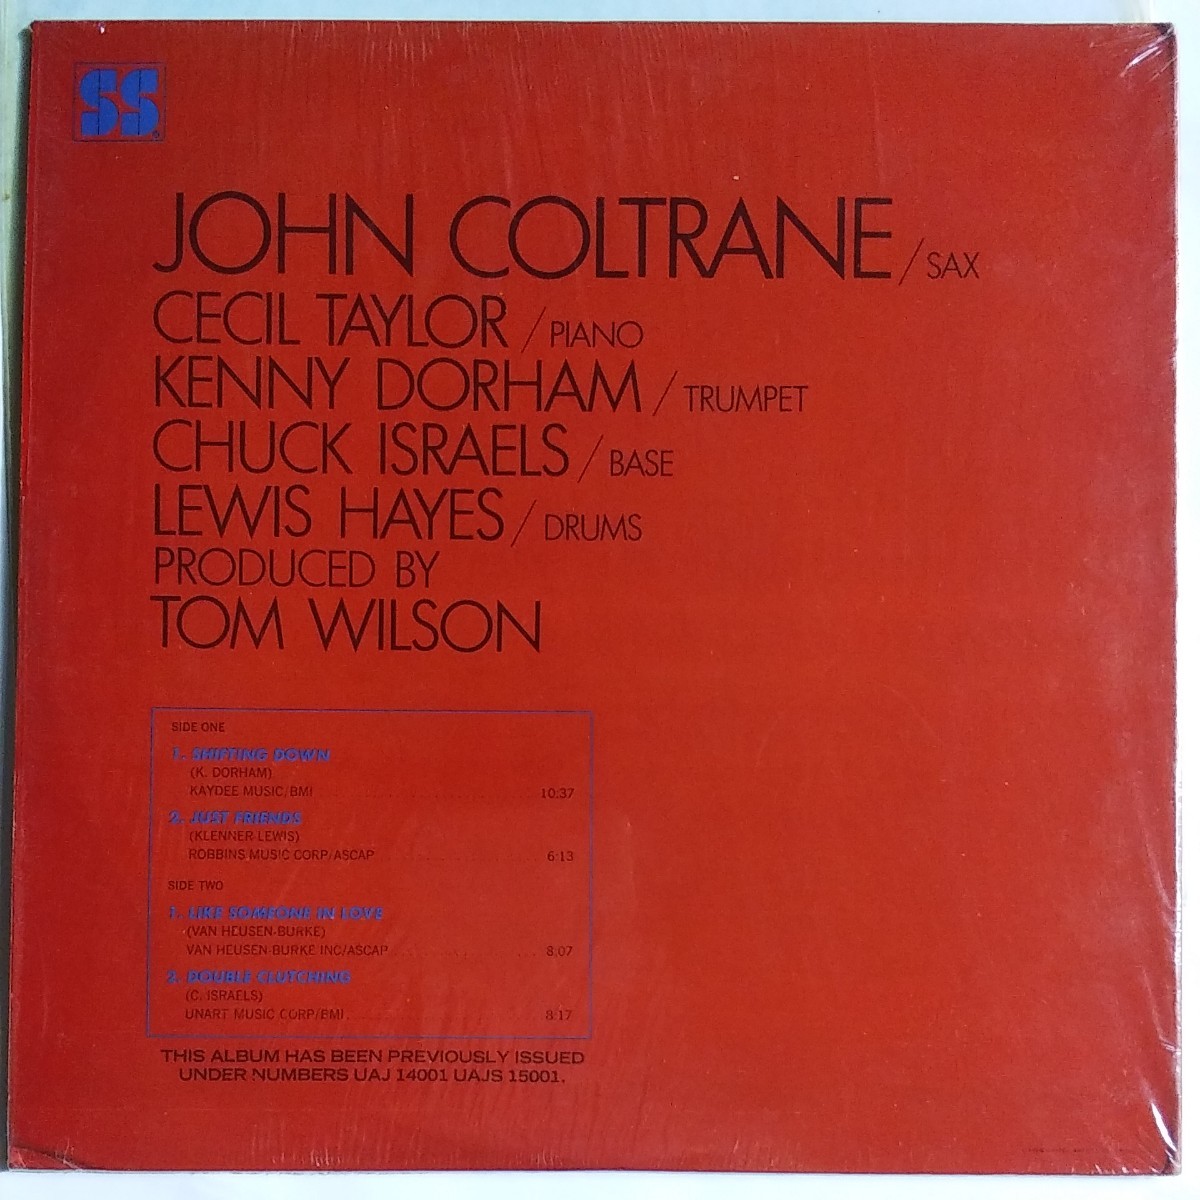 COLTRANE TIME Solid State STEREO SS 18025 THIS ALBUM HAS BEEN PREVIOUSLY ISSUED UNDER NUMBERS UAJ 14001 _画像2